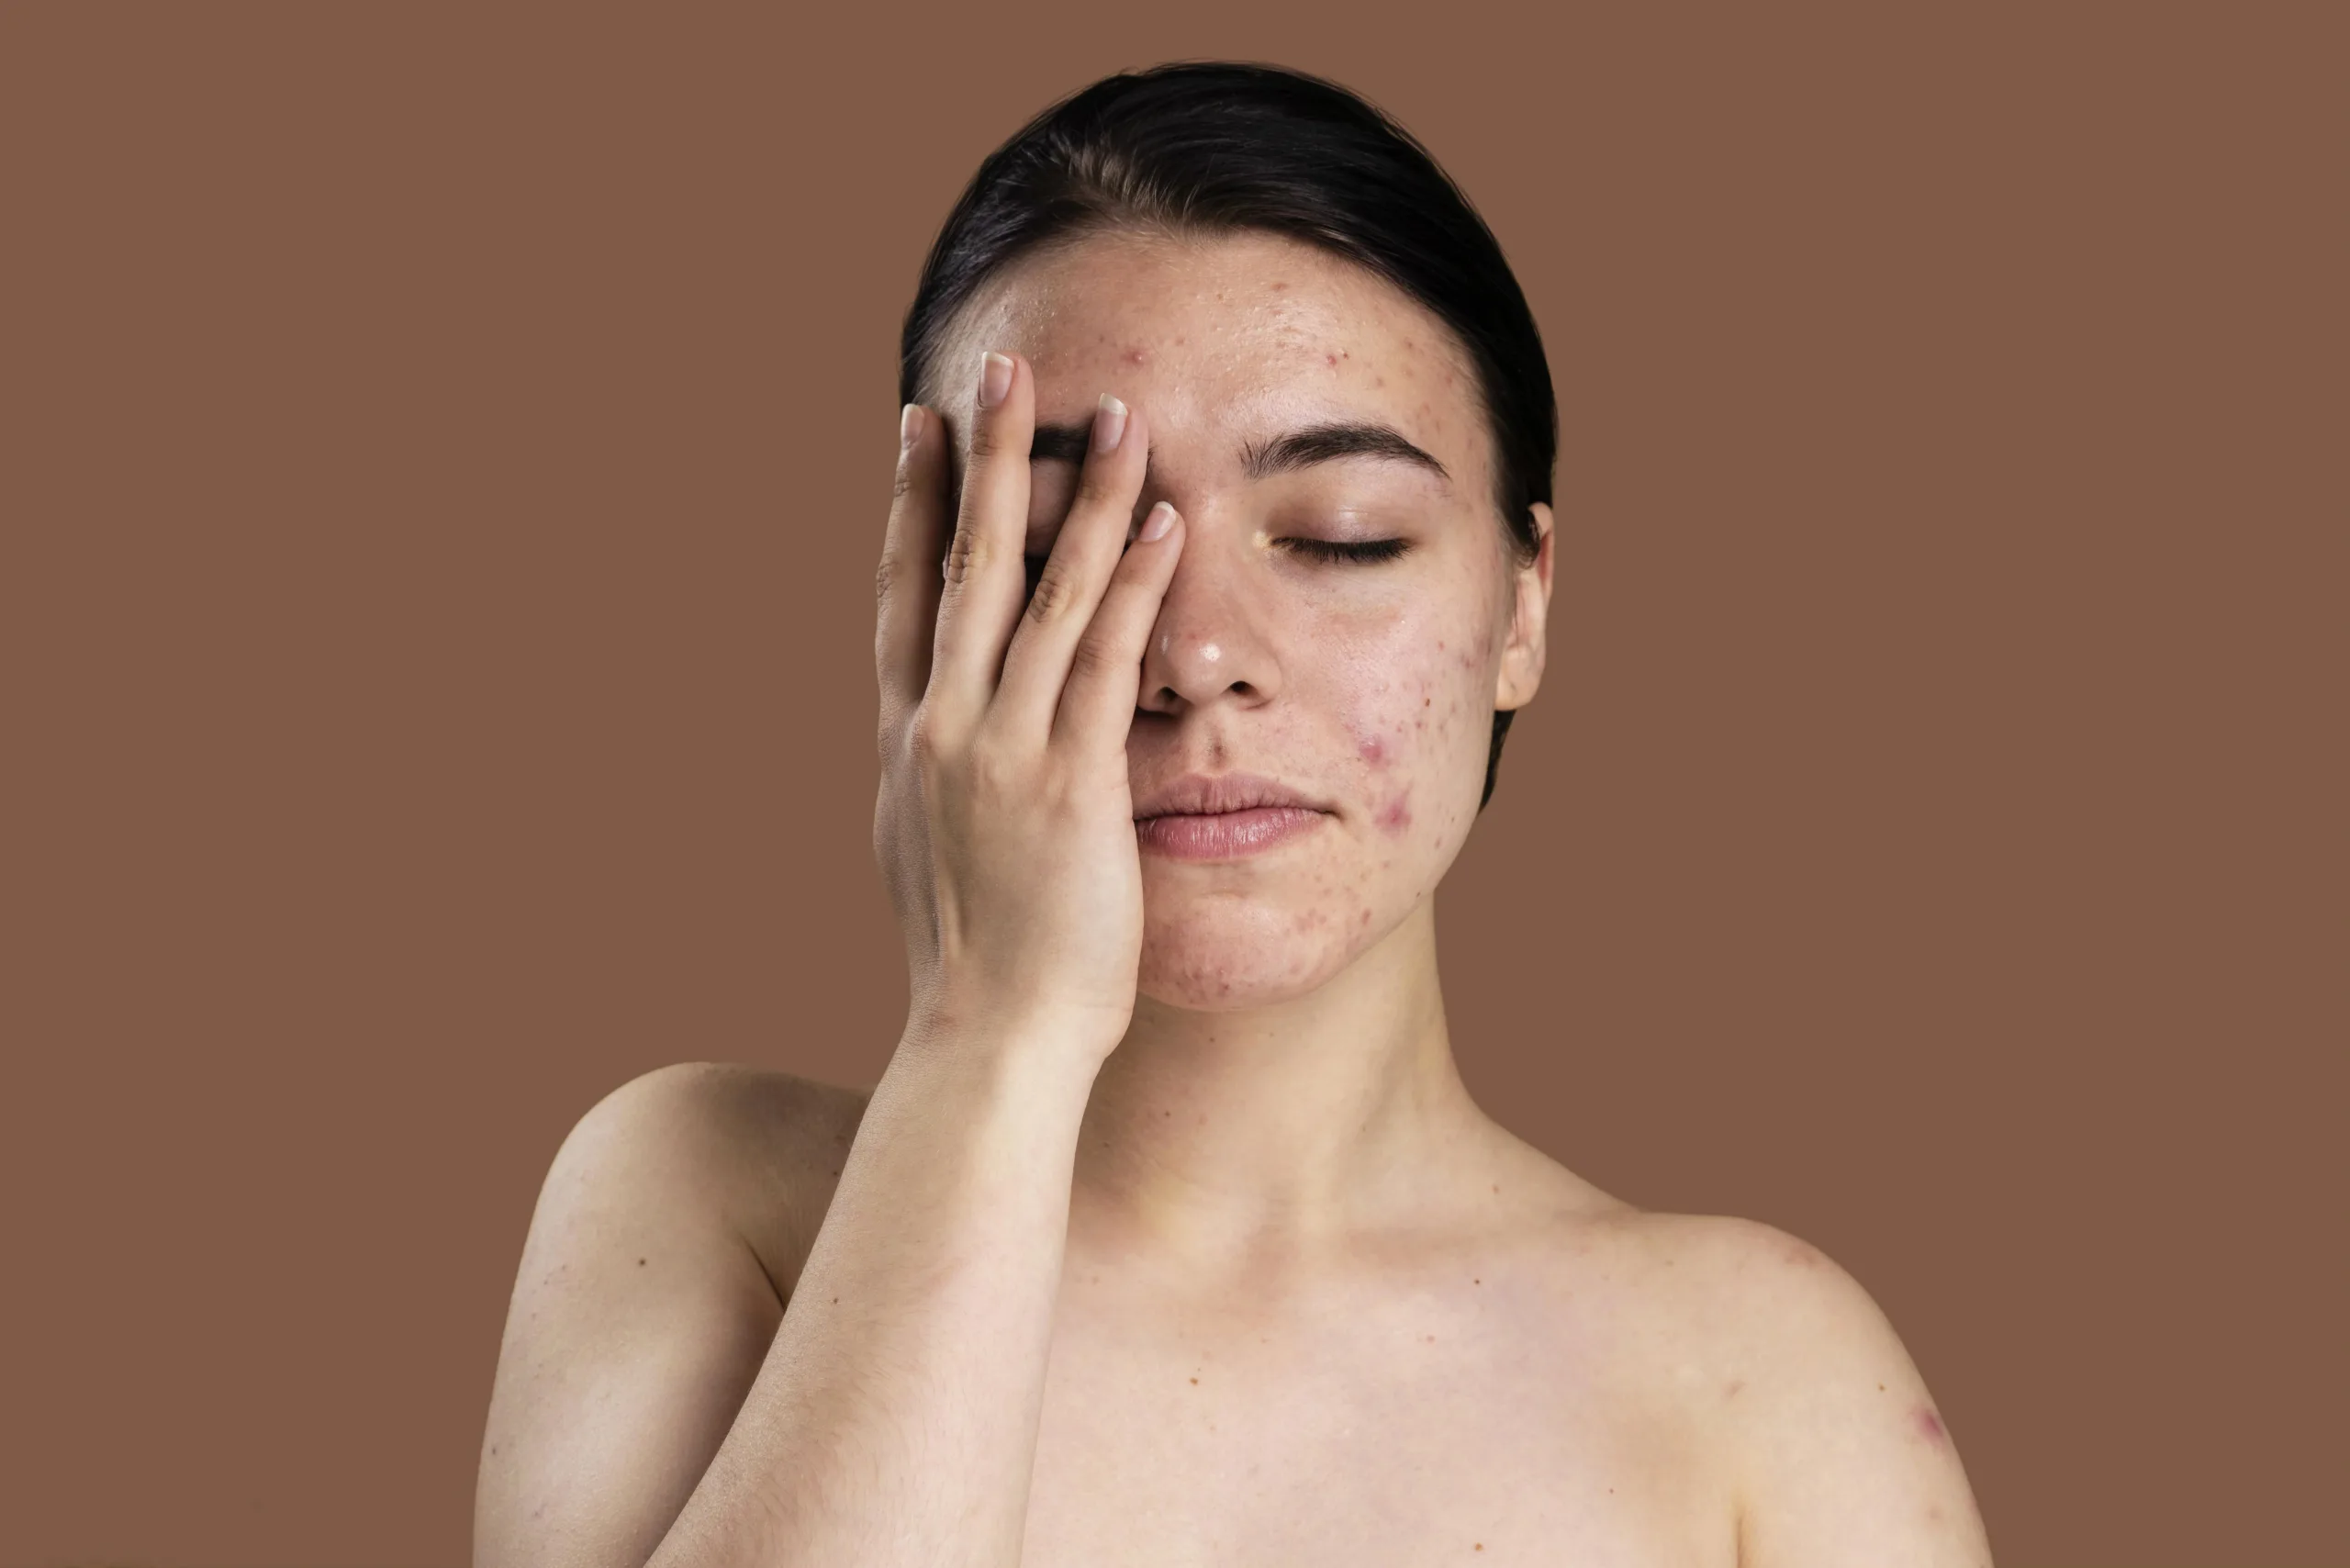 Understanding About Acne and Acne Scars